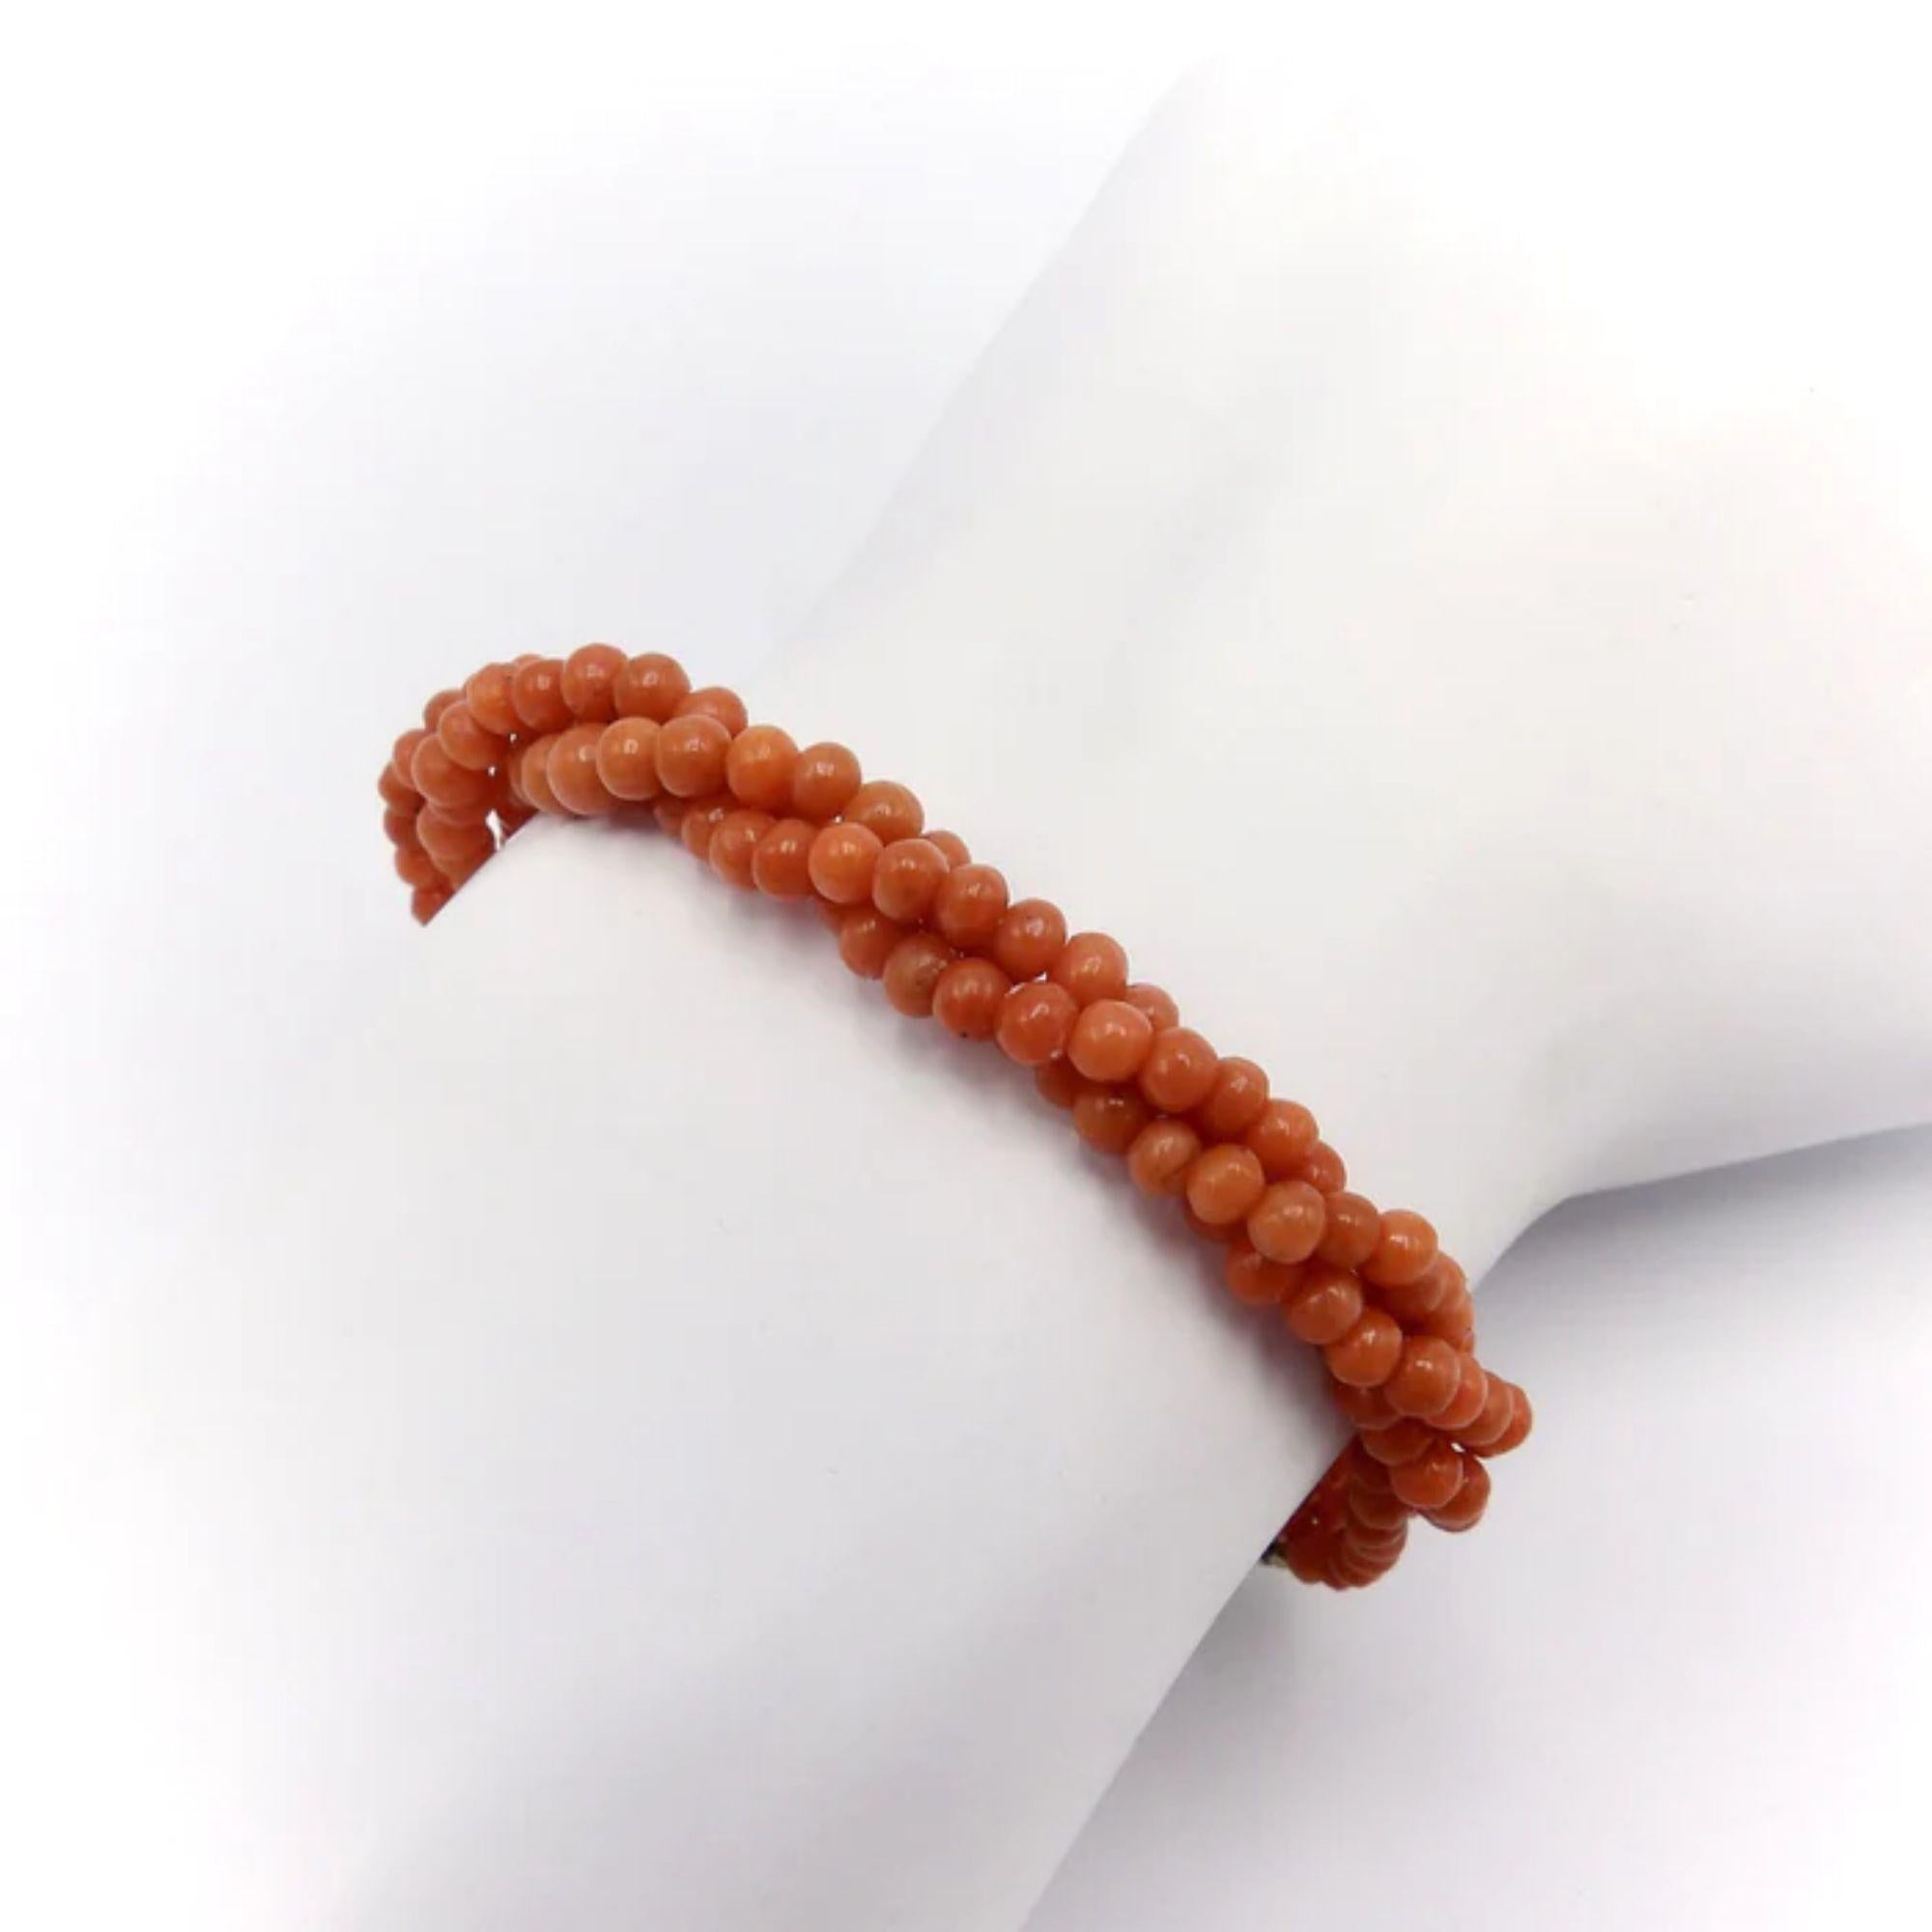 Triple Strand Victorian Salmon Coral Bracelet with 14K Gold Clasp, Circa 1900 For Sale 1